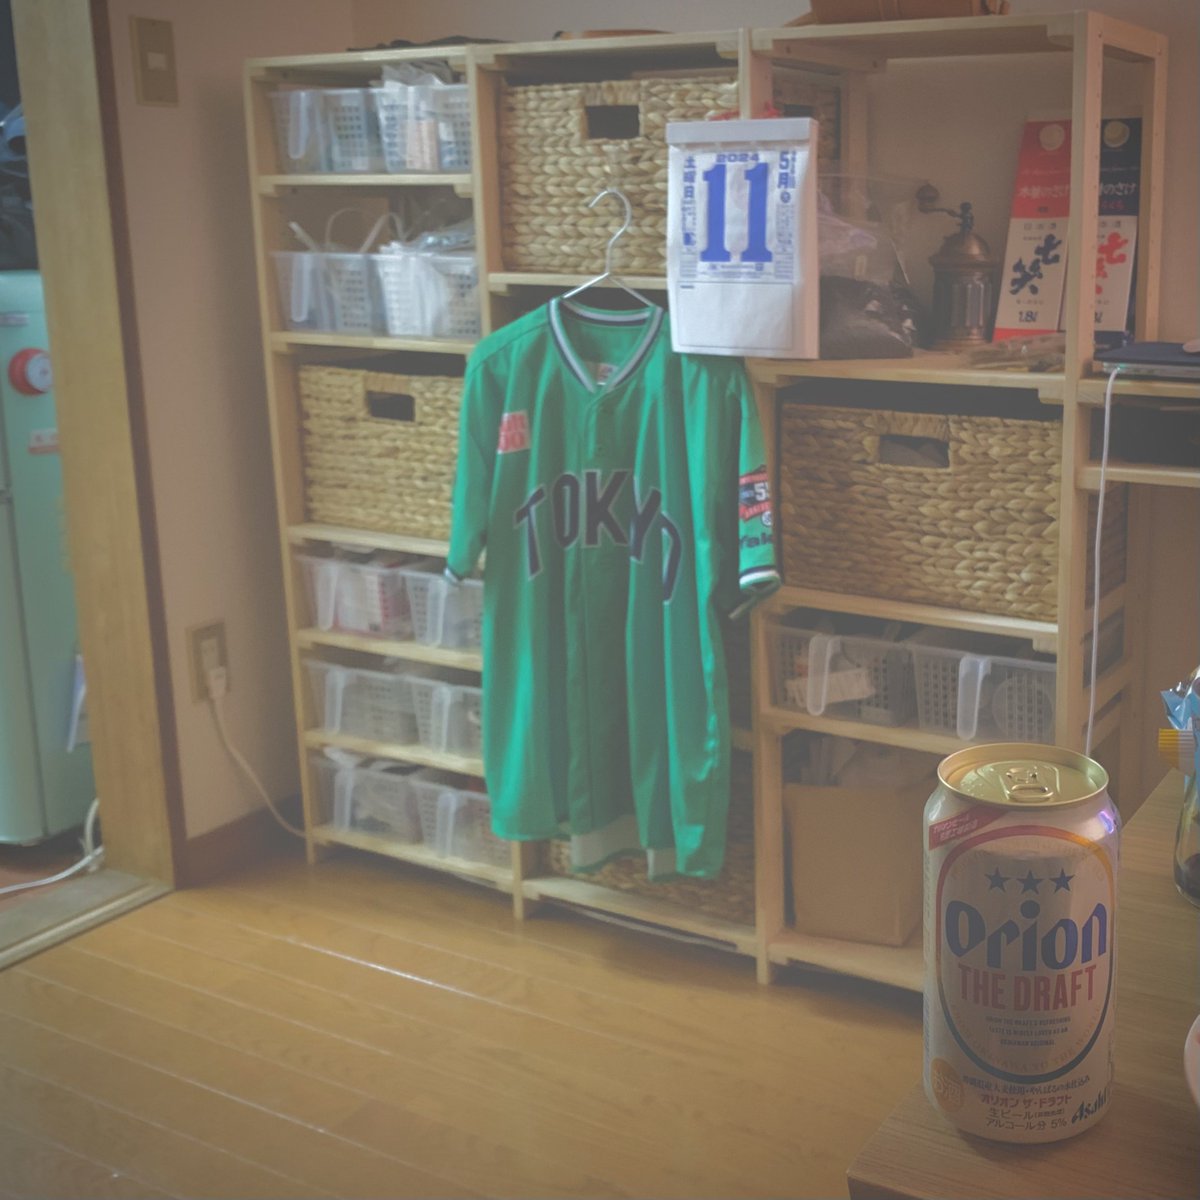 I’ve made up my mind to drink #OrionBeer in summertime, it’s Okinawa made and makes me feel southern winds #AuthenticJPNsnaps #AuthenticJPNfavorites #Japanese beer